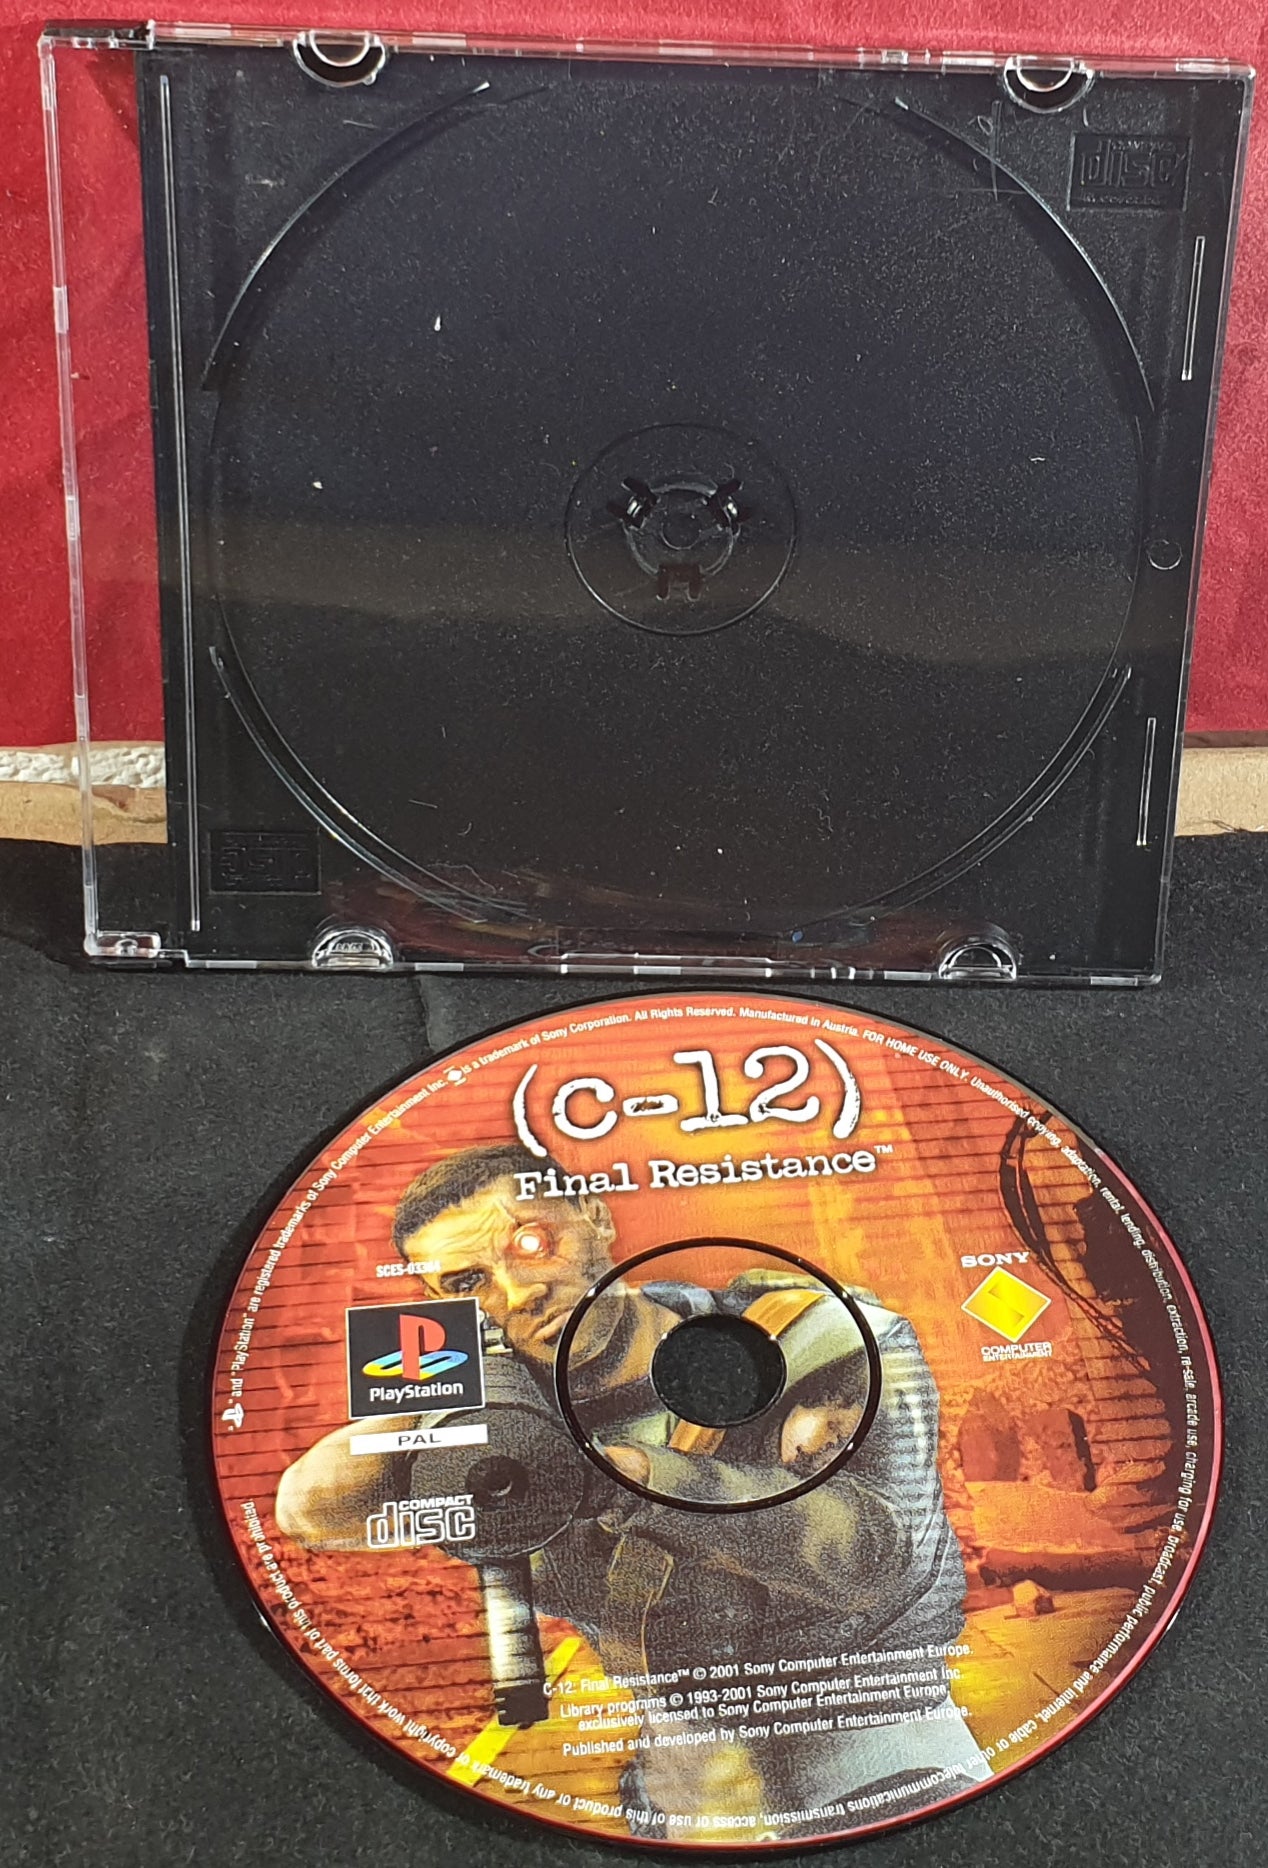 C-12 Final Resistance Sony Playstation 1 (PS1) Game Disc Only